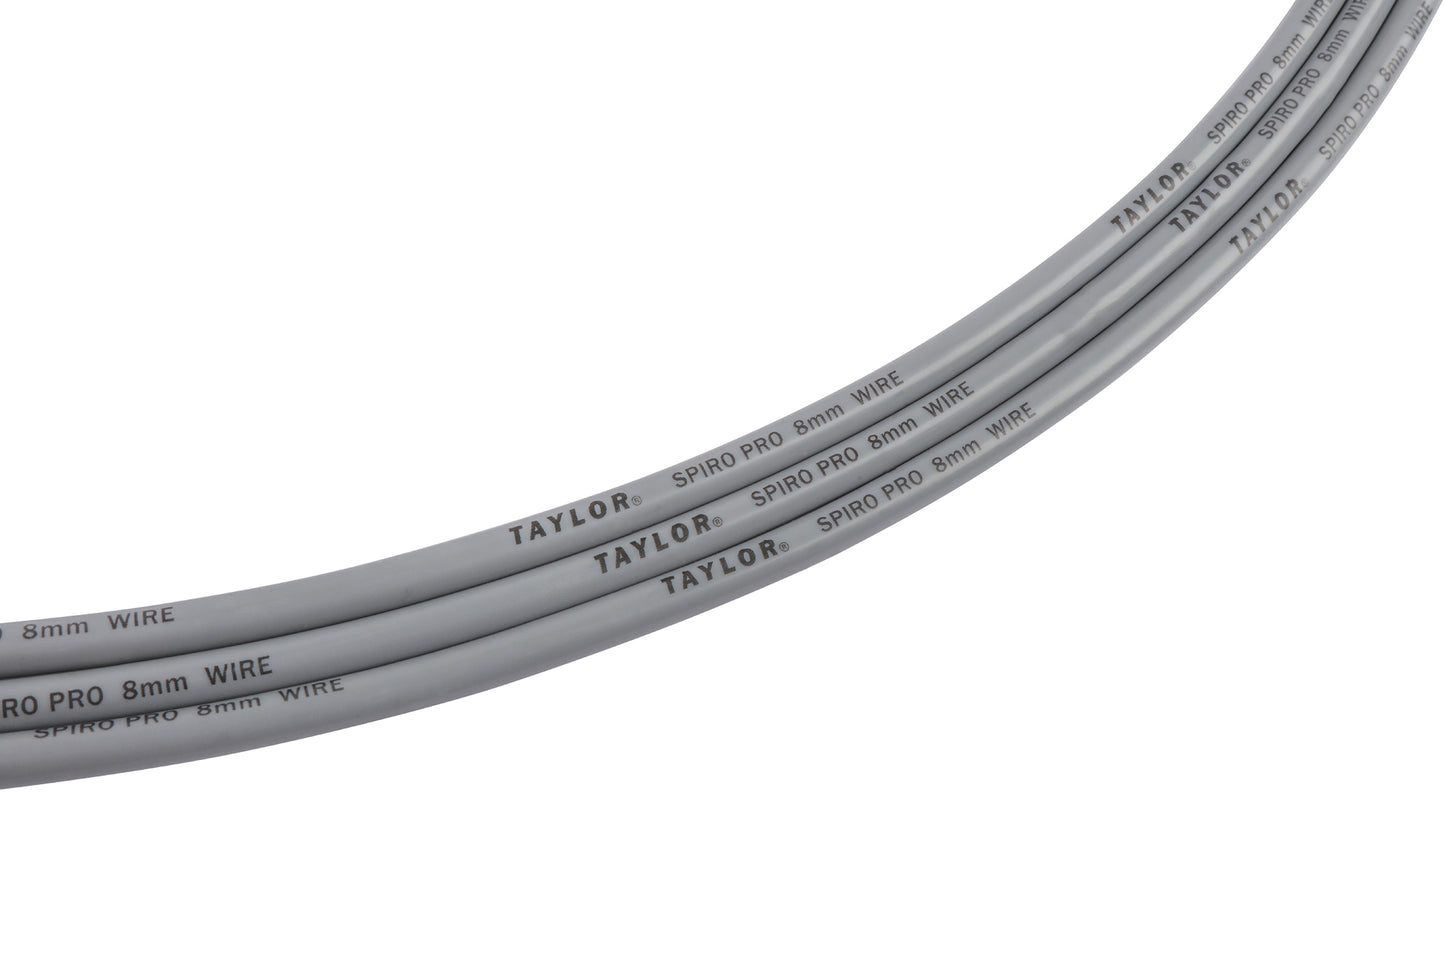 Taylor Cable 53851 8mm Spiro-Pro univ 8 cyl 90 Gray